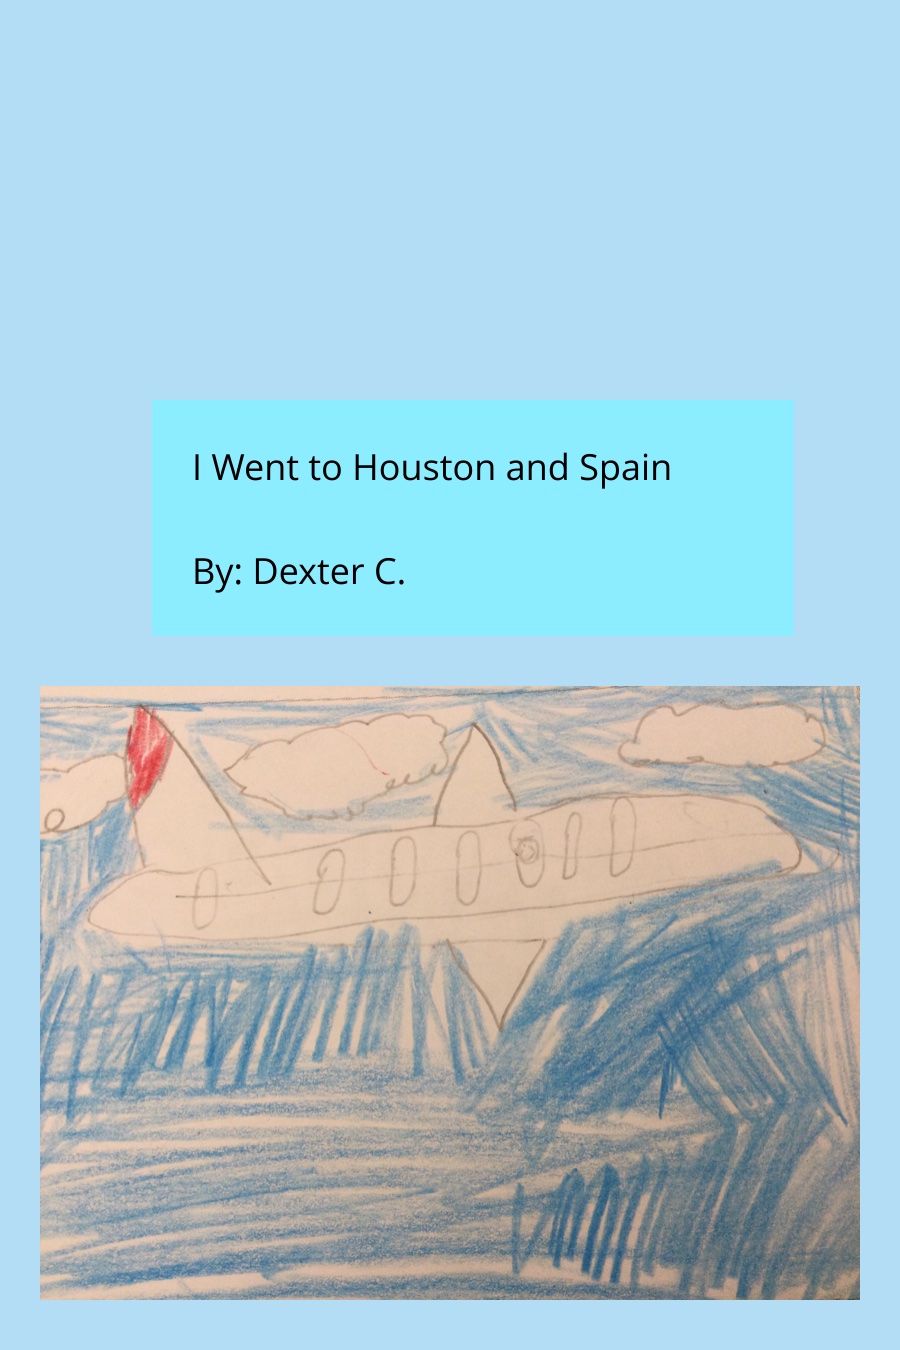 I Went to Houston and Spain by Dexter C